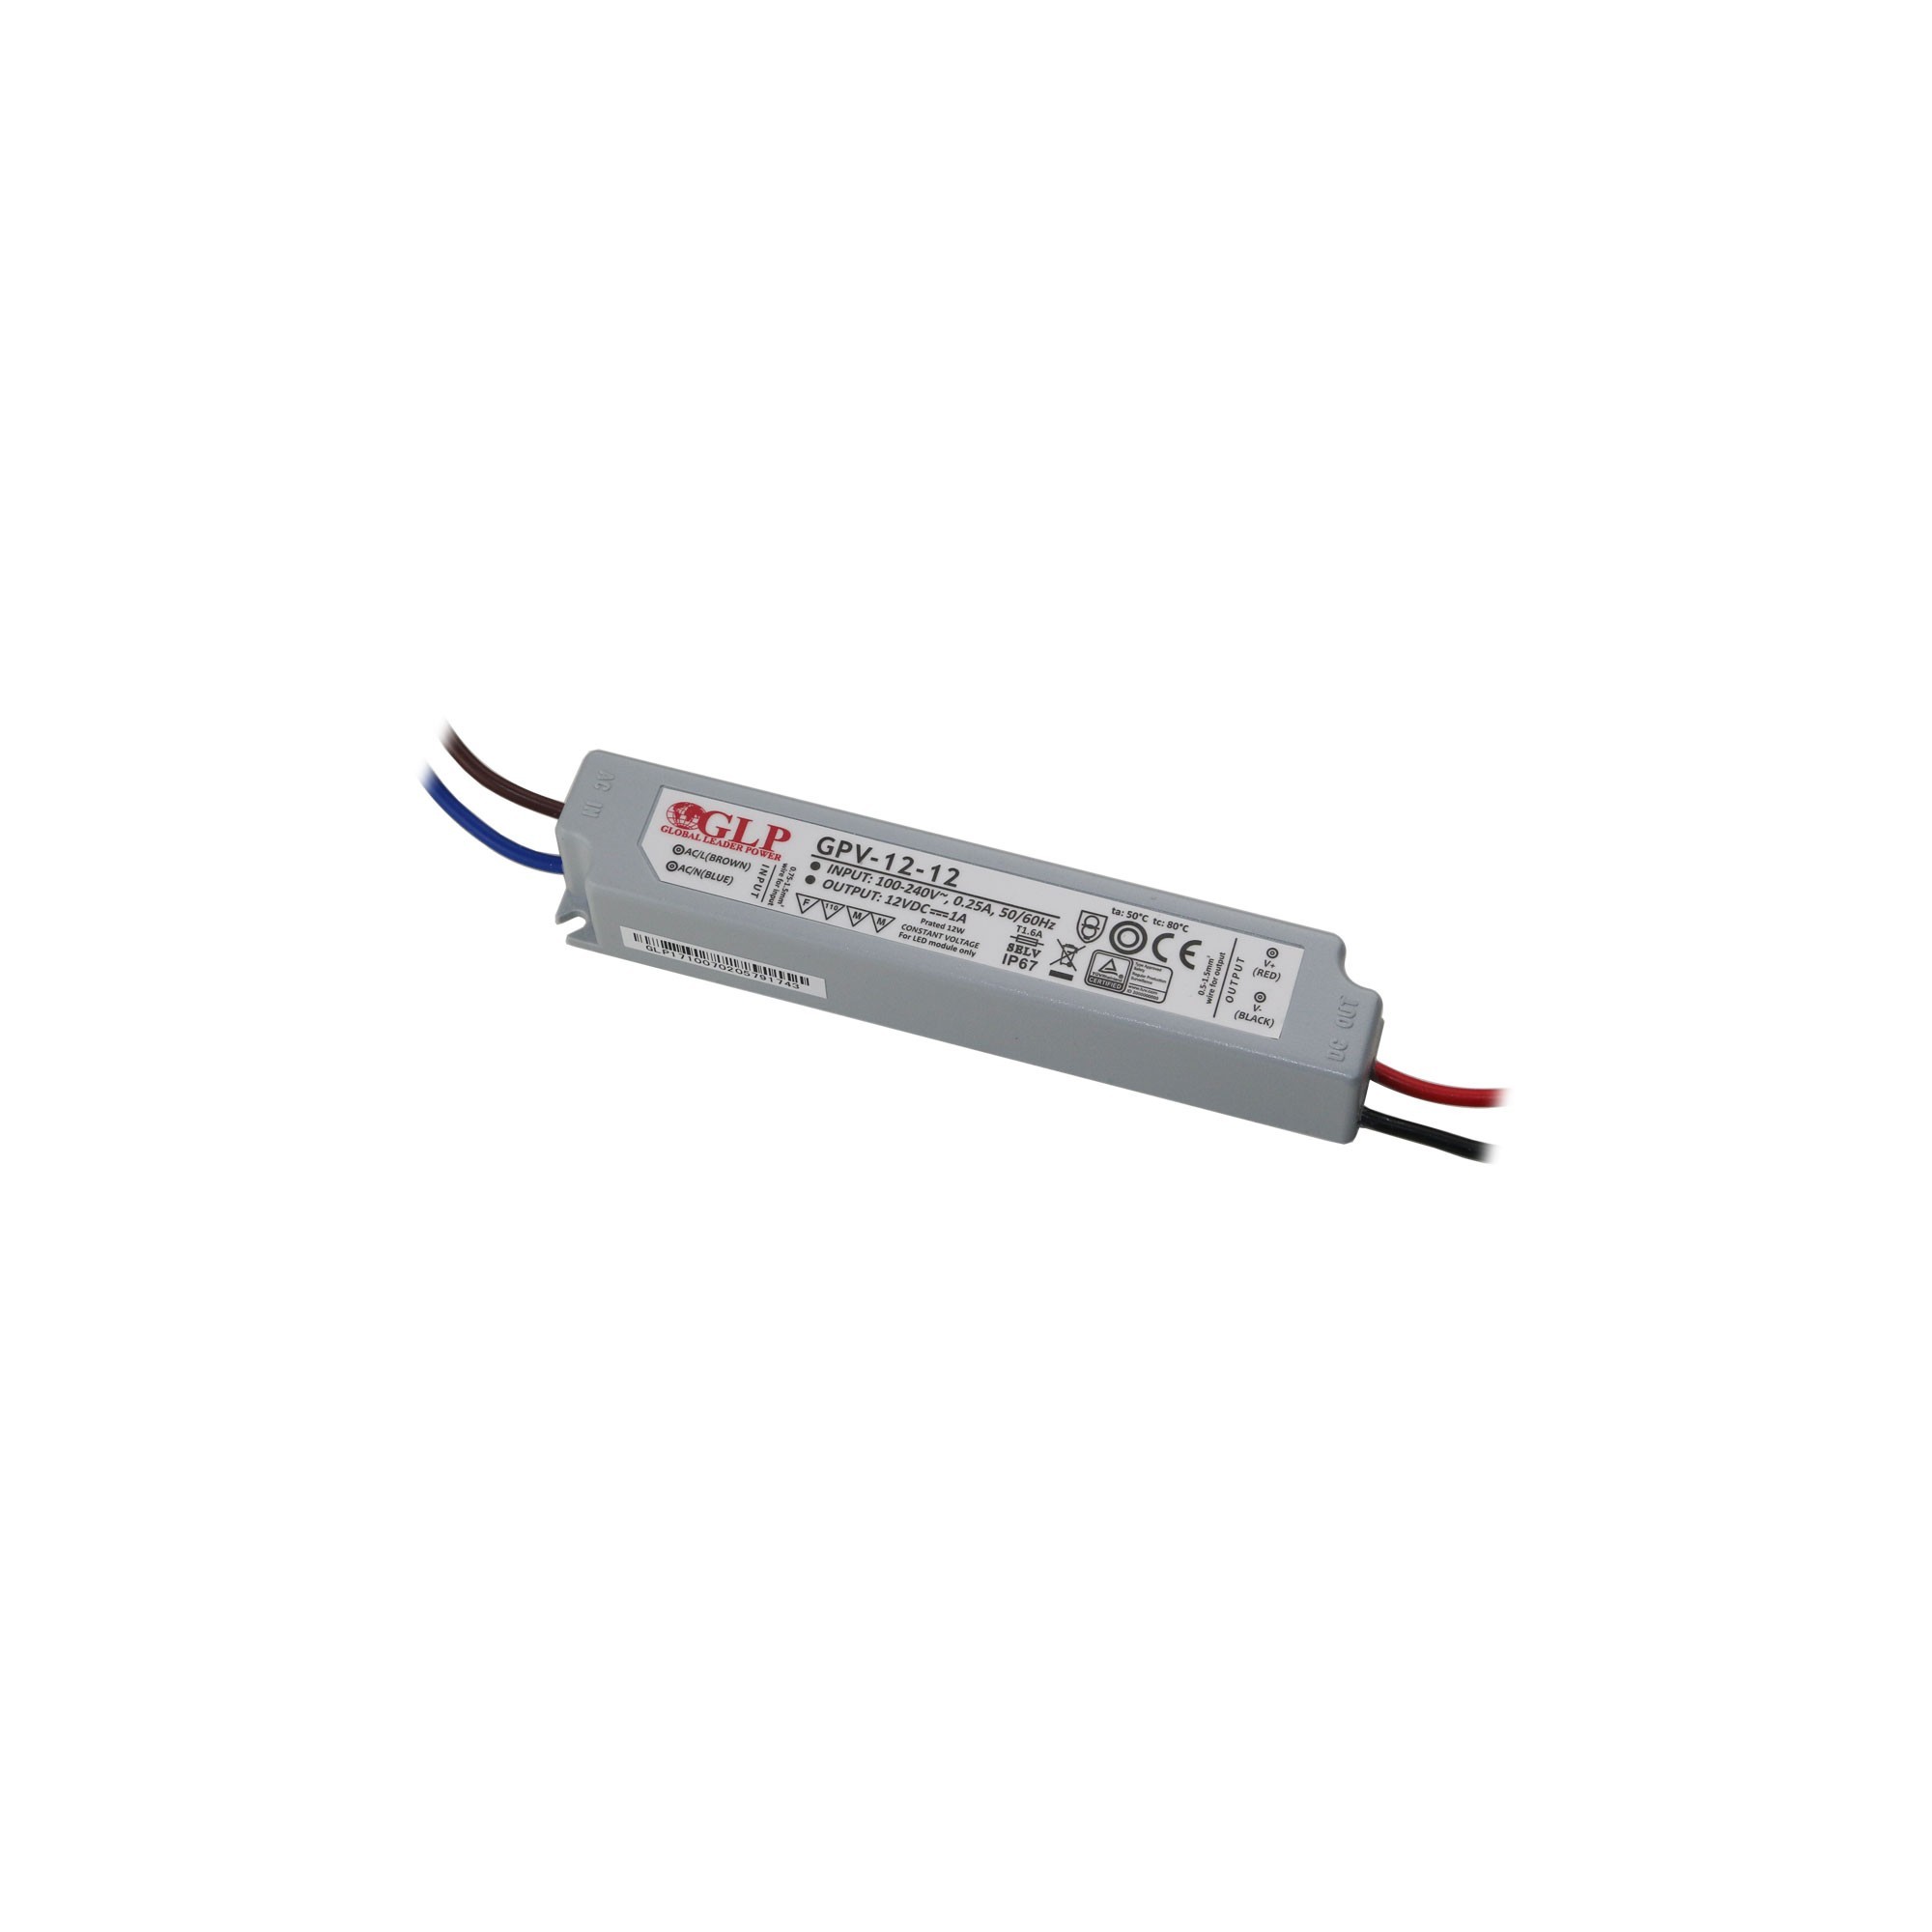 LED voeding constante spanning / 12V DC / 12W IP67 waterdicht